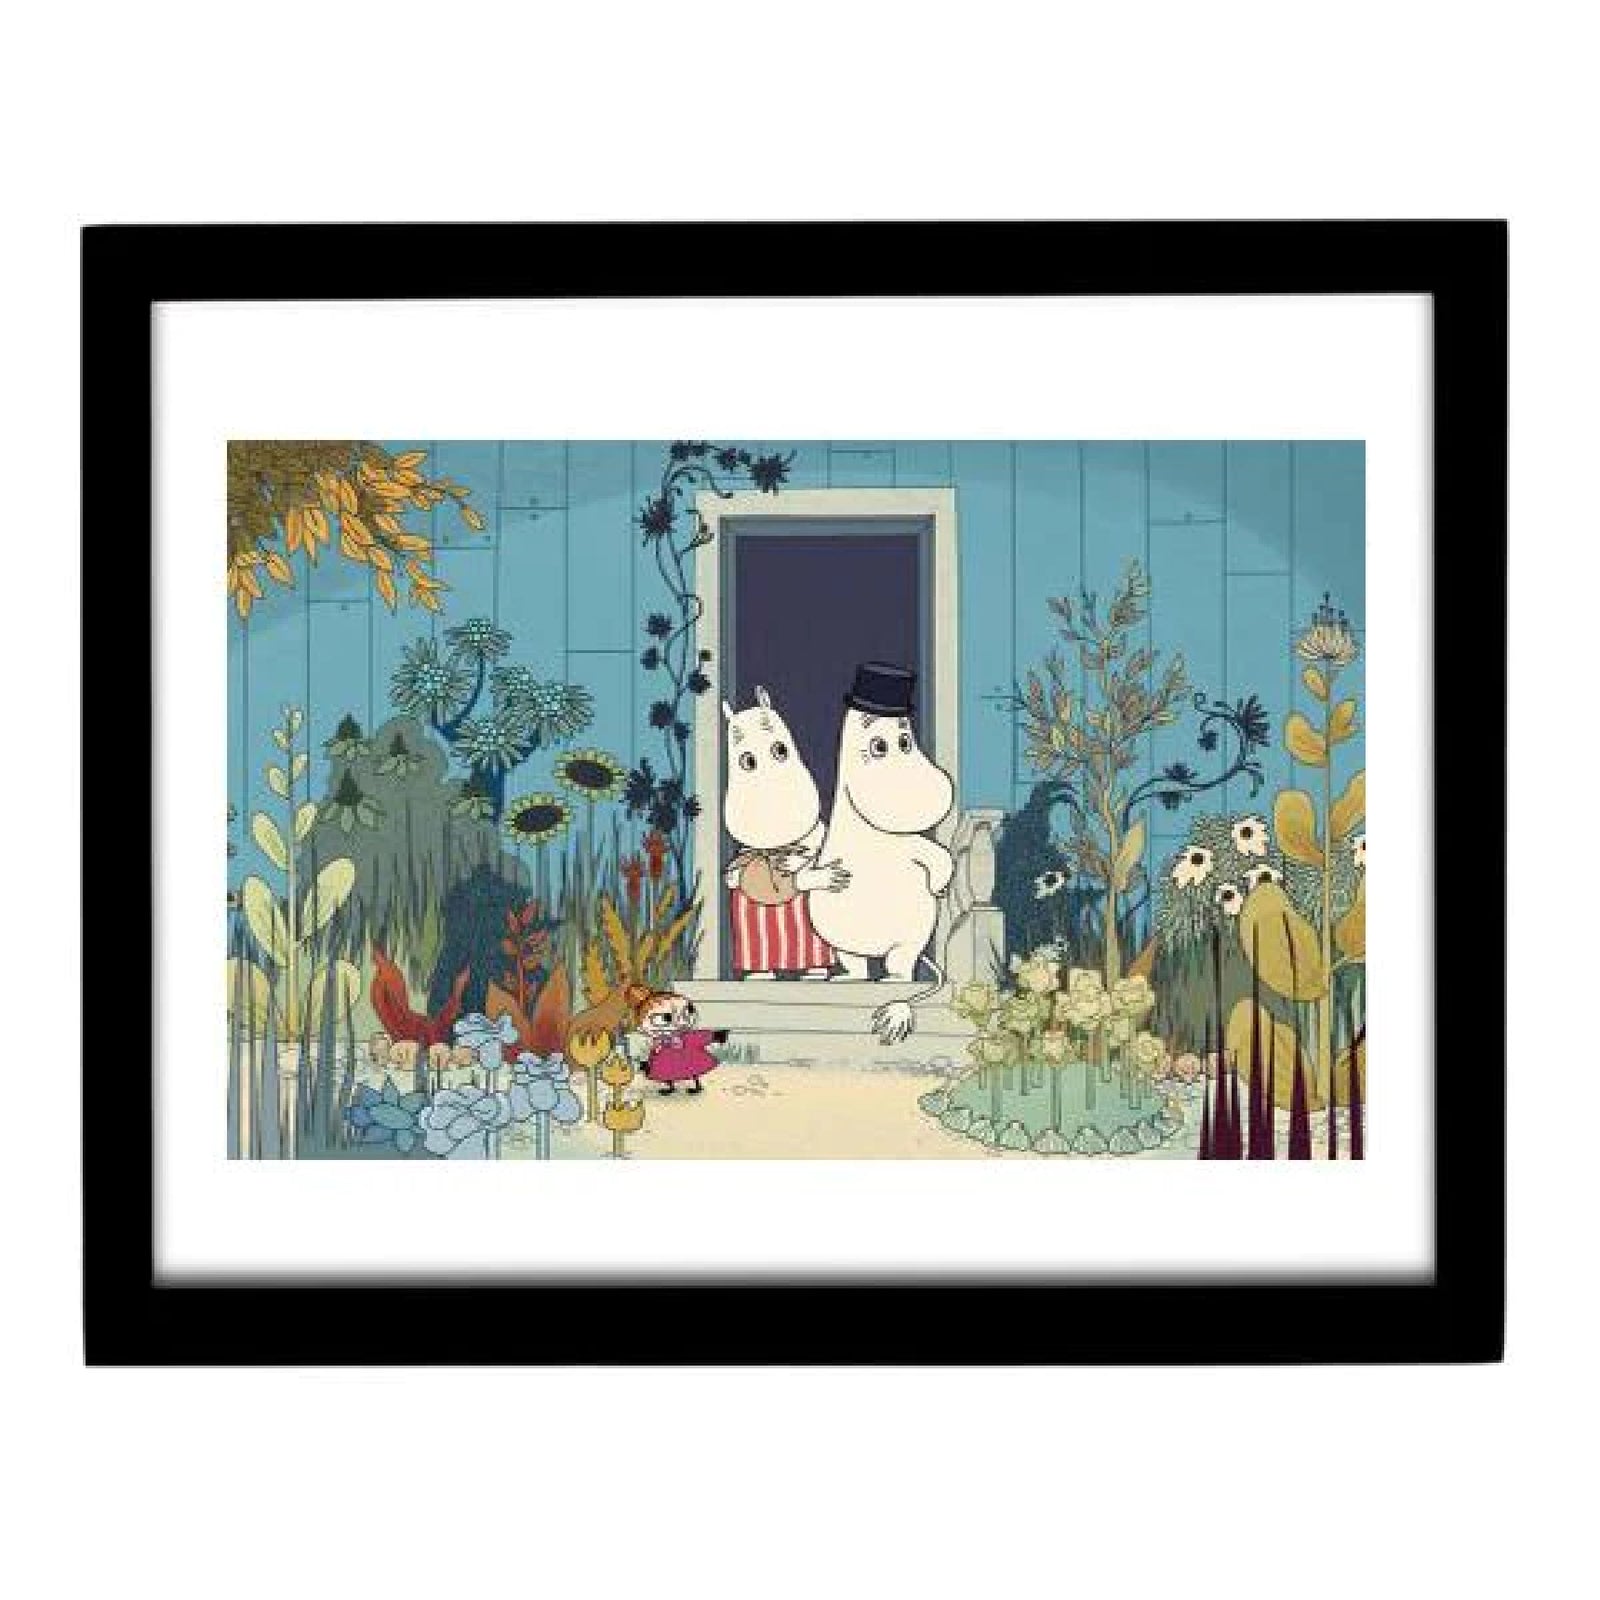 Moomin - The Journey Affiche